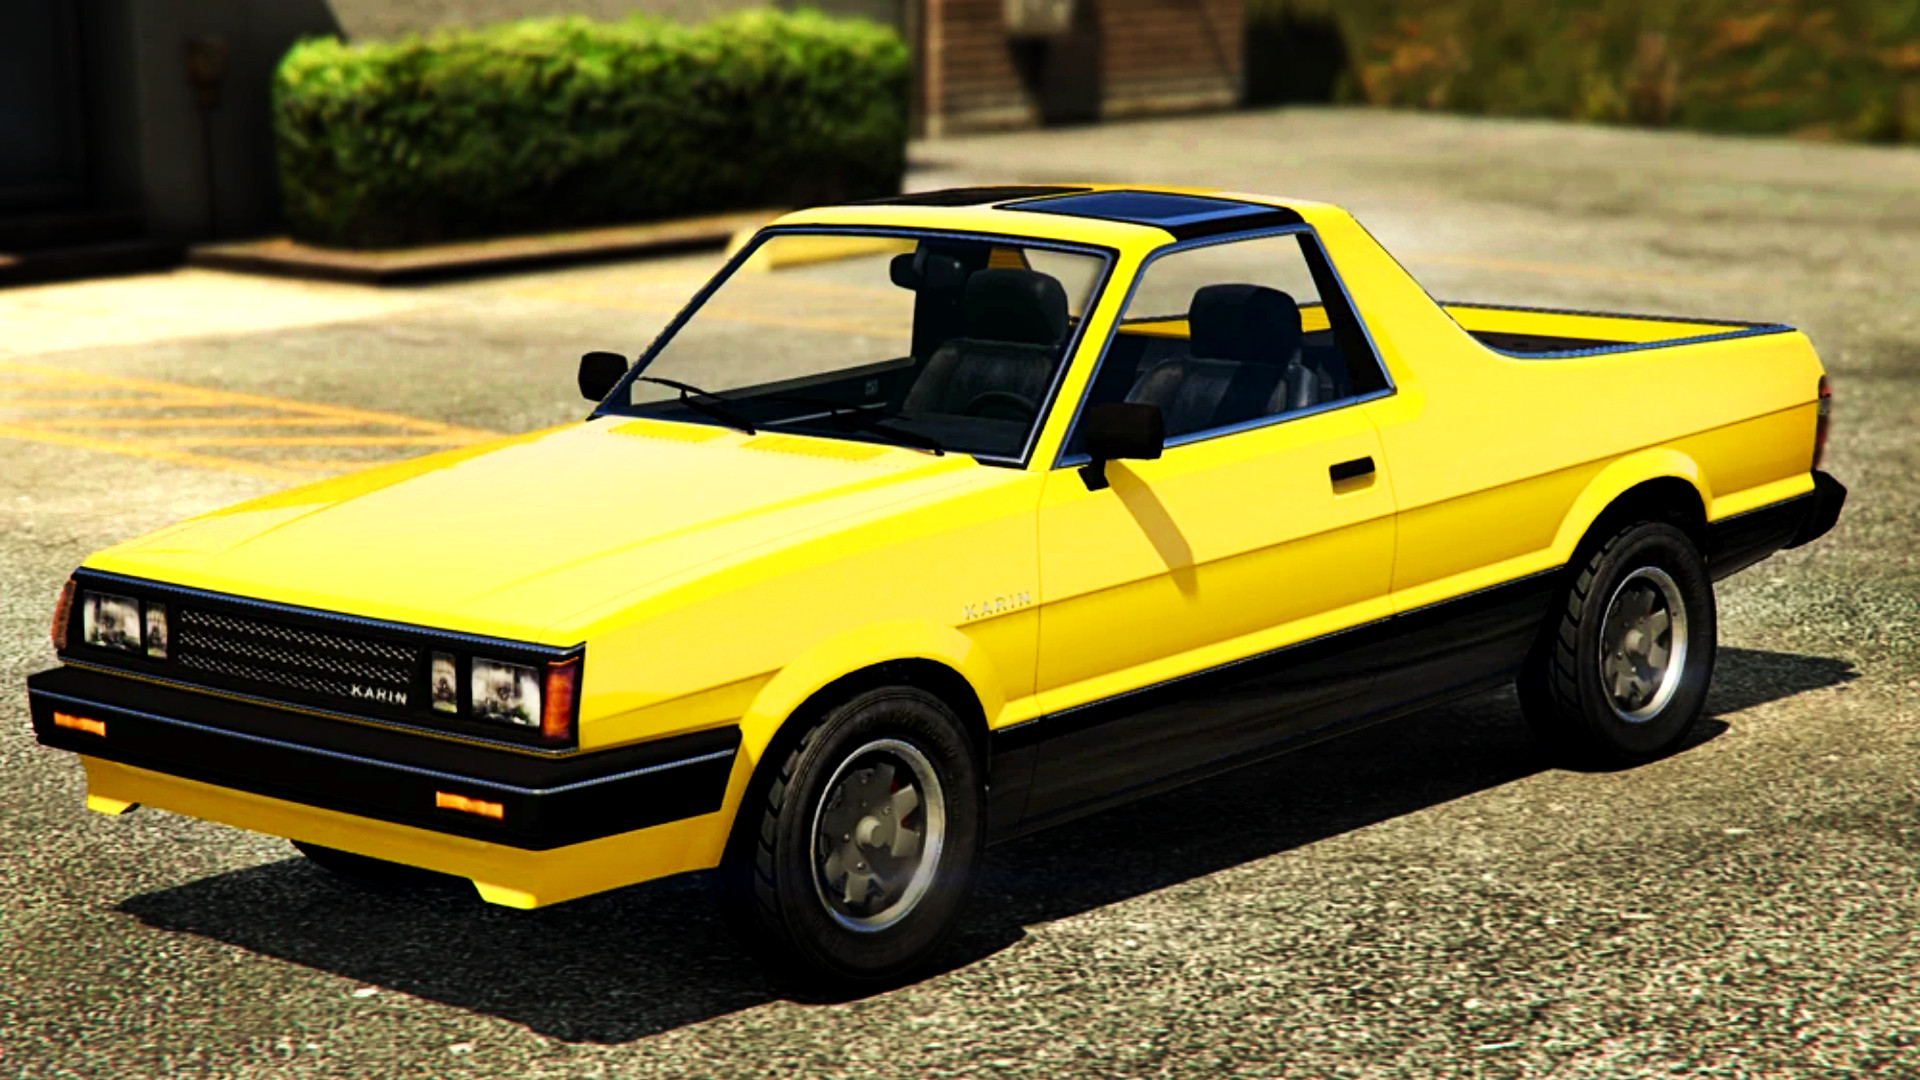 GTA Online weekly update adds new car, the bratty Karin Boor